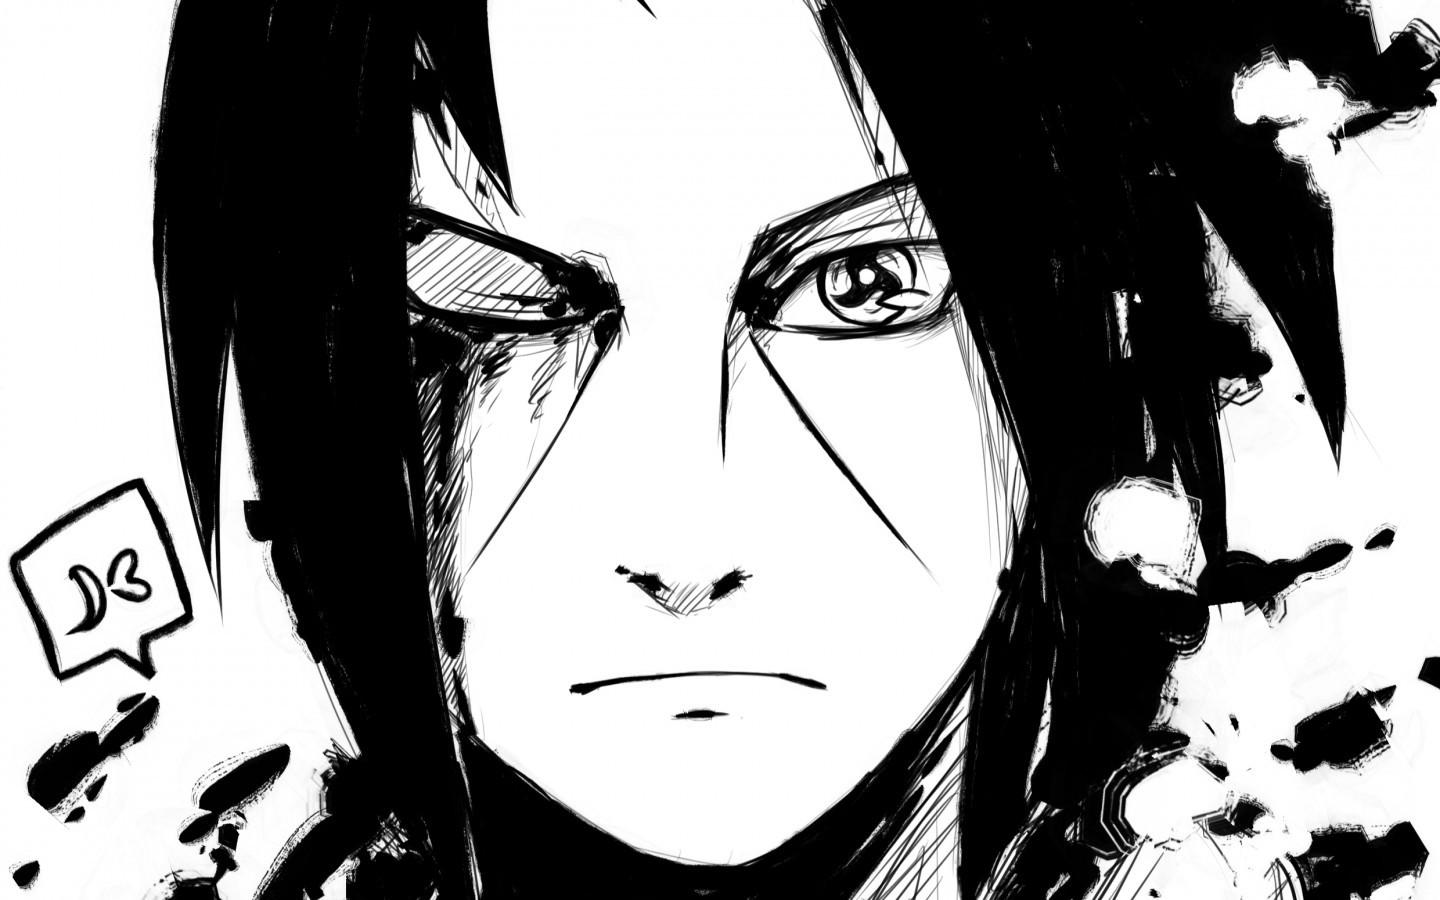 Itachi Black And White Wallpapers - Wallpaper Cave